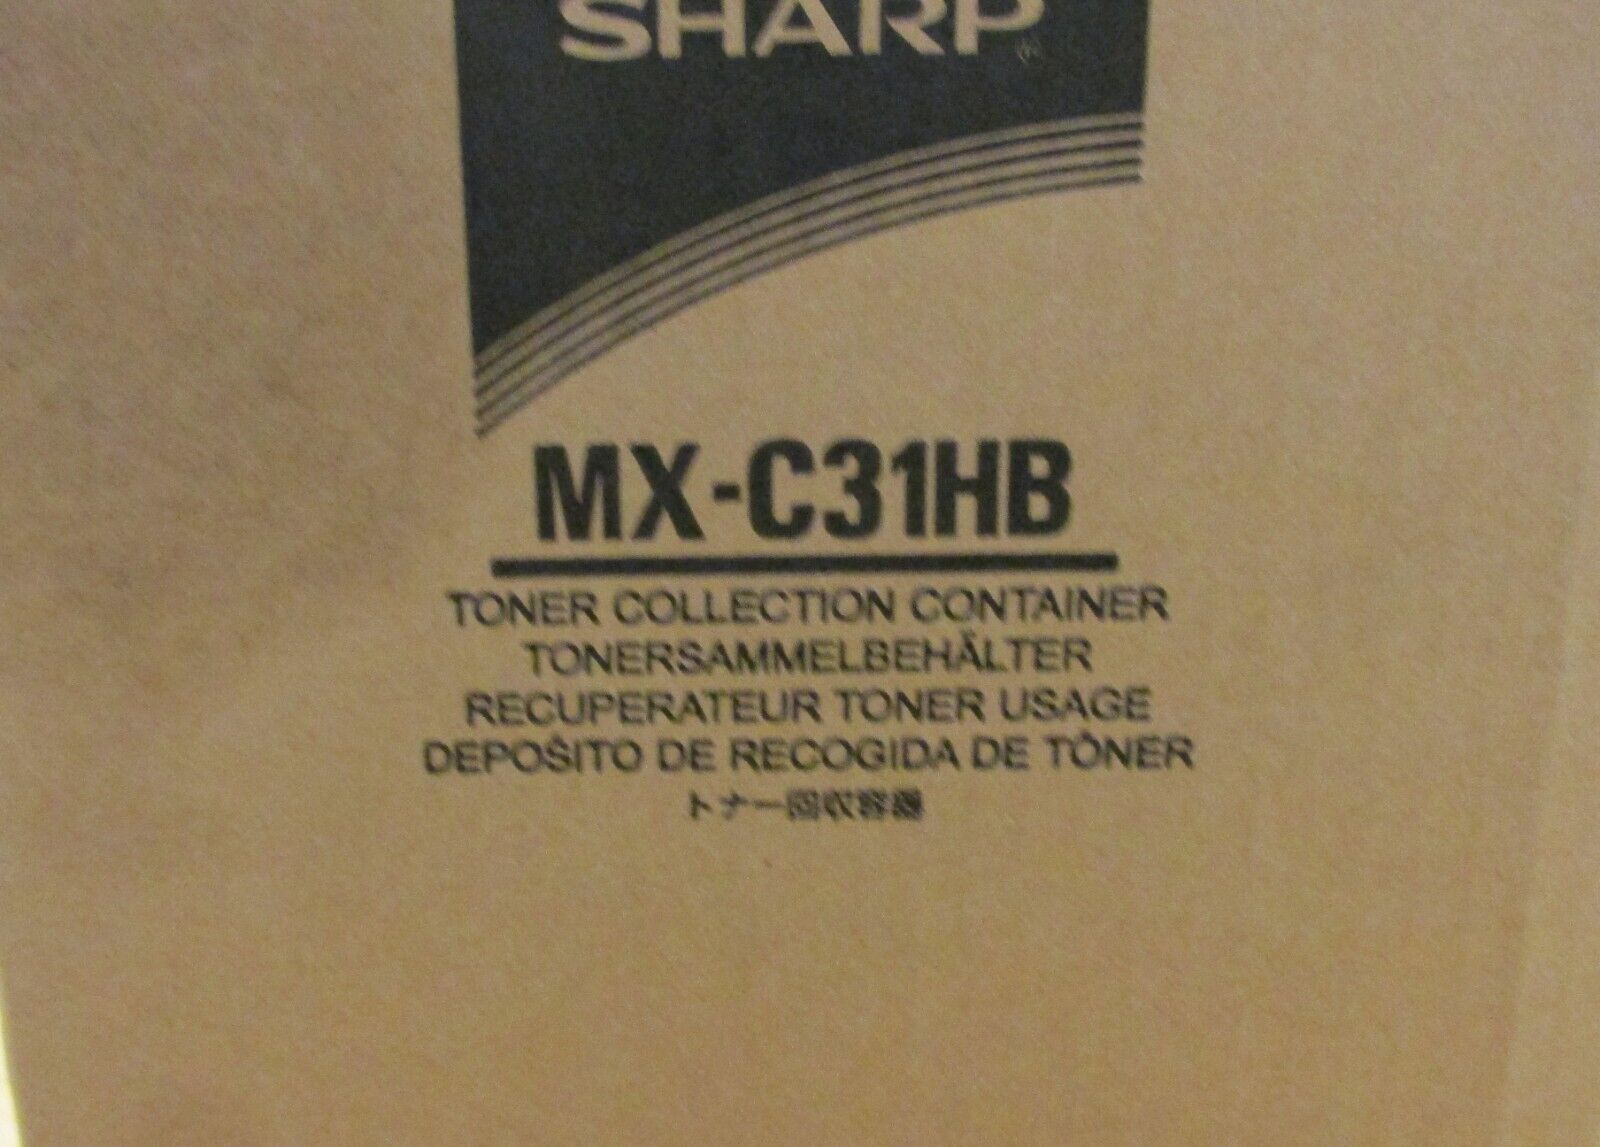 Sharp MX-C31HB Toner Collection Container 2 Per Box for Sharp Copiers 